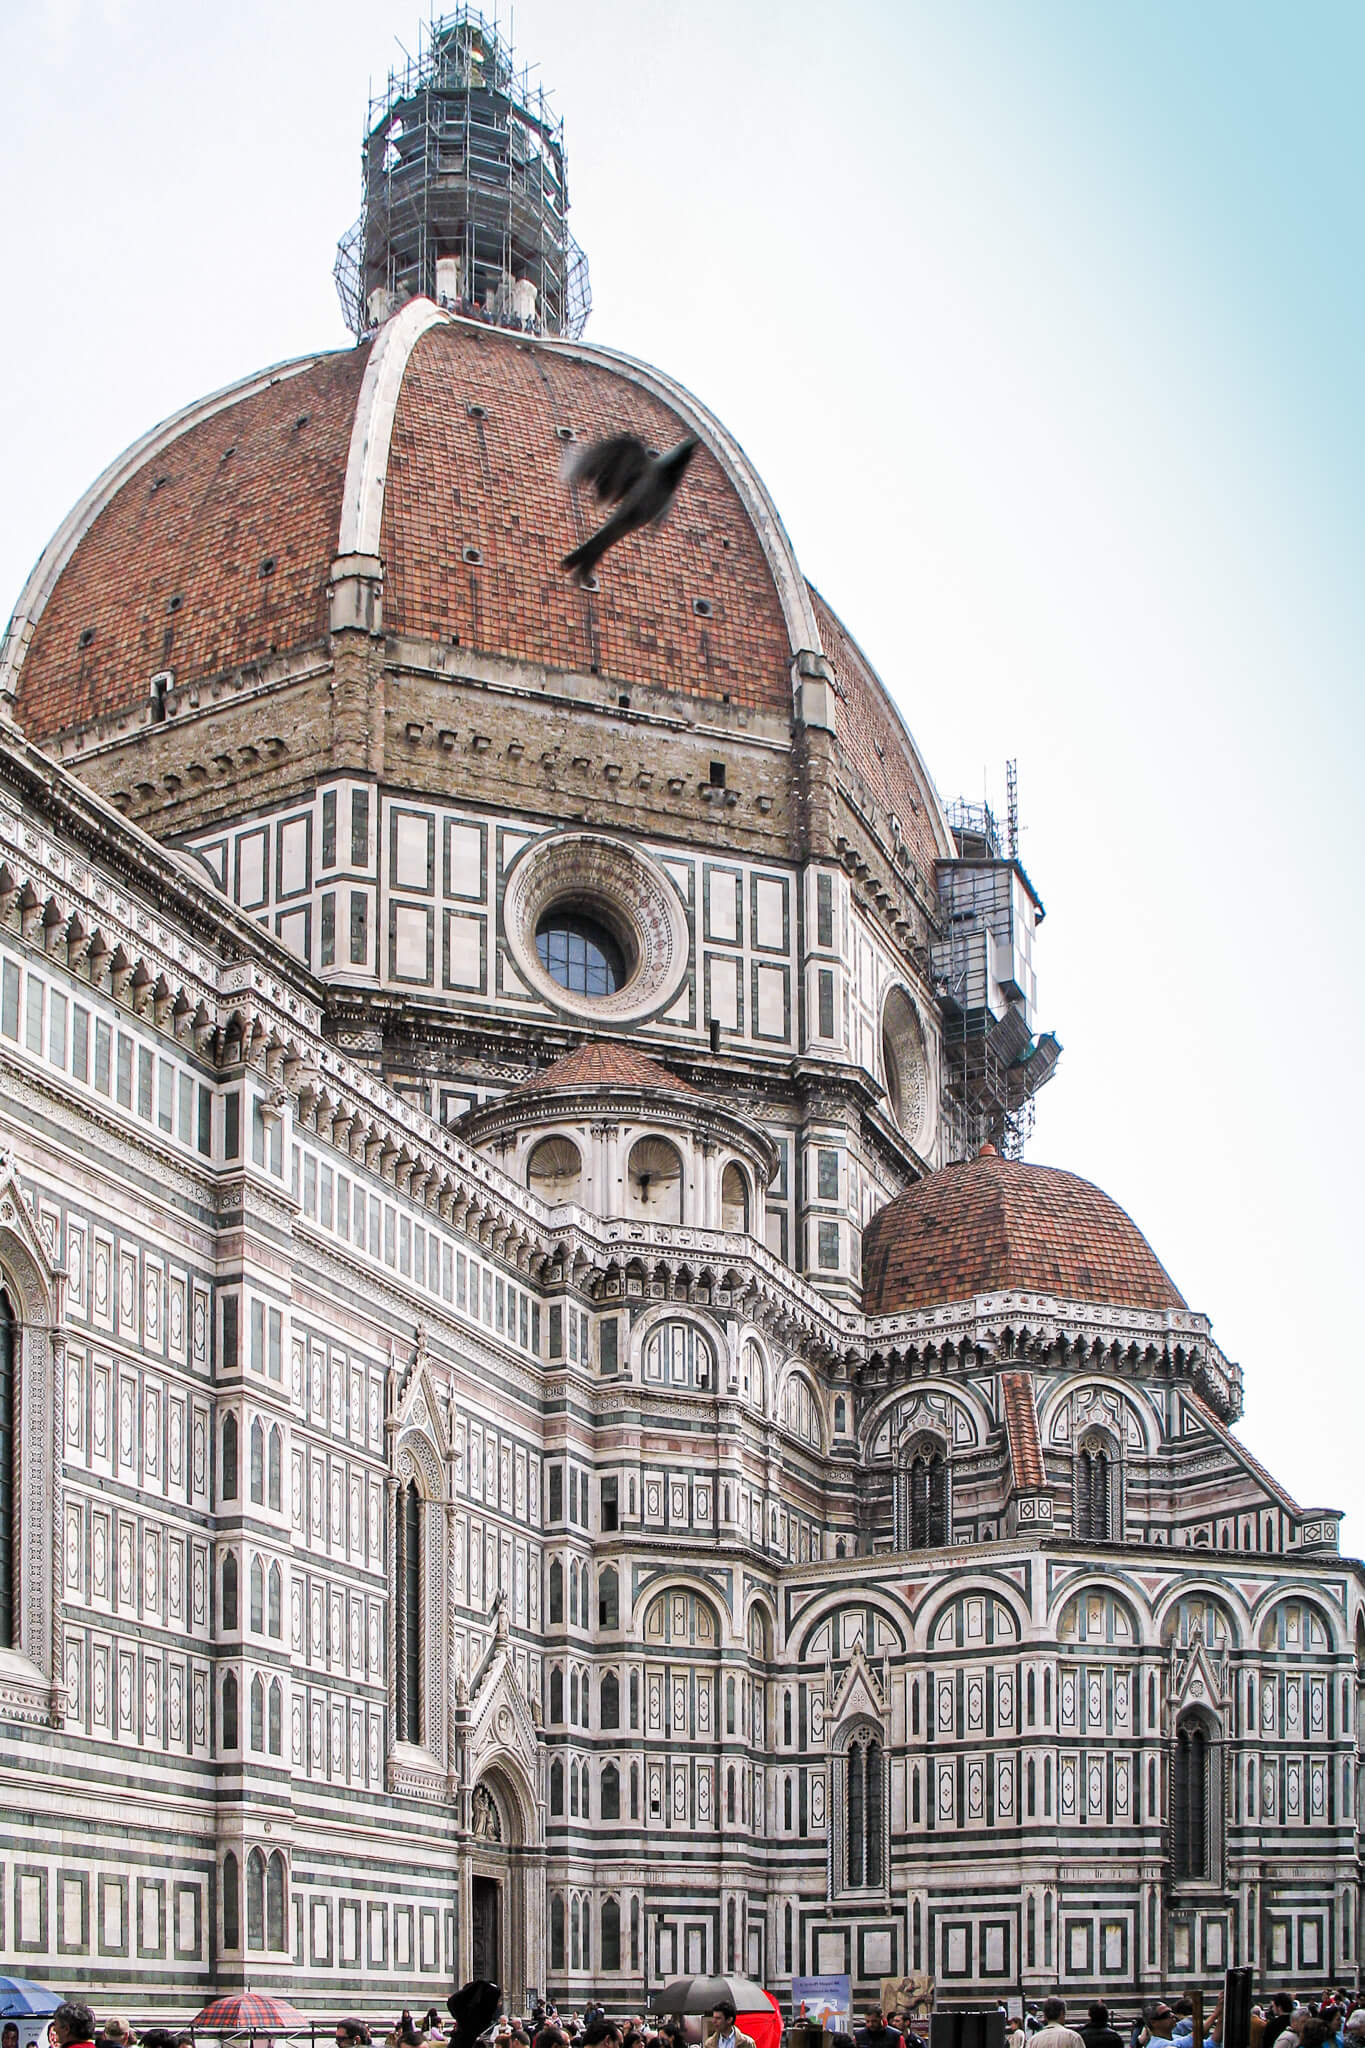 Dome and transept of the Florence Cathedral or Duomo